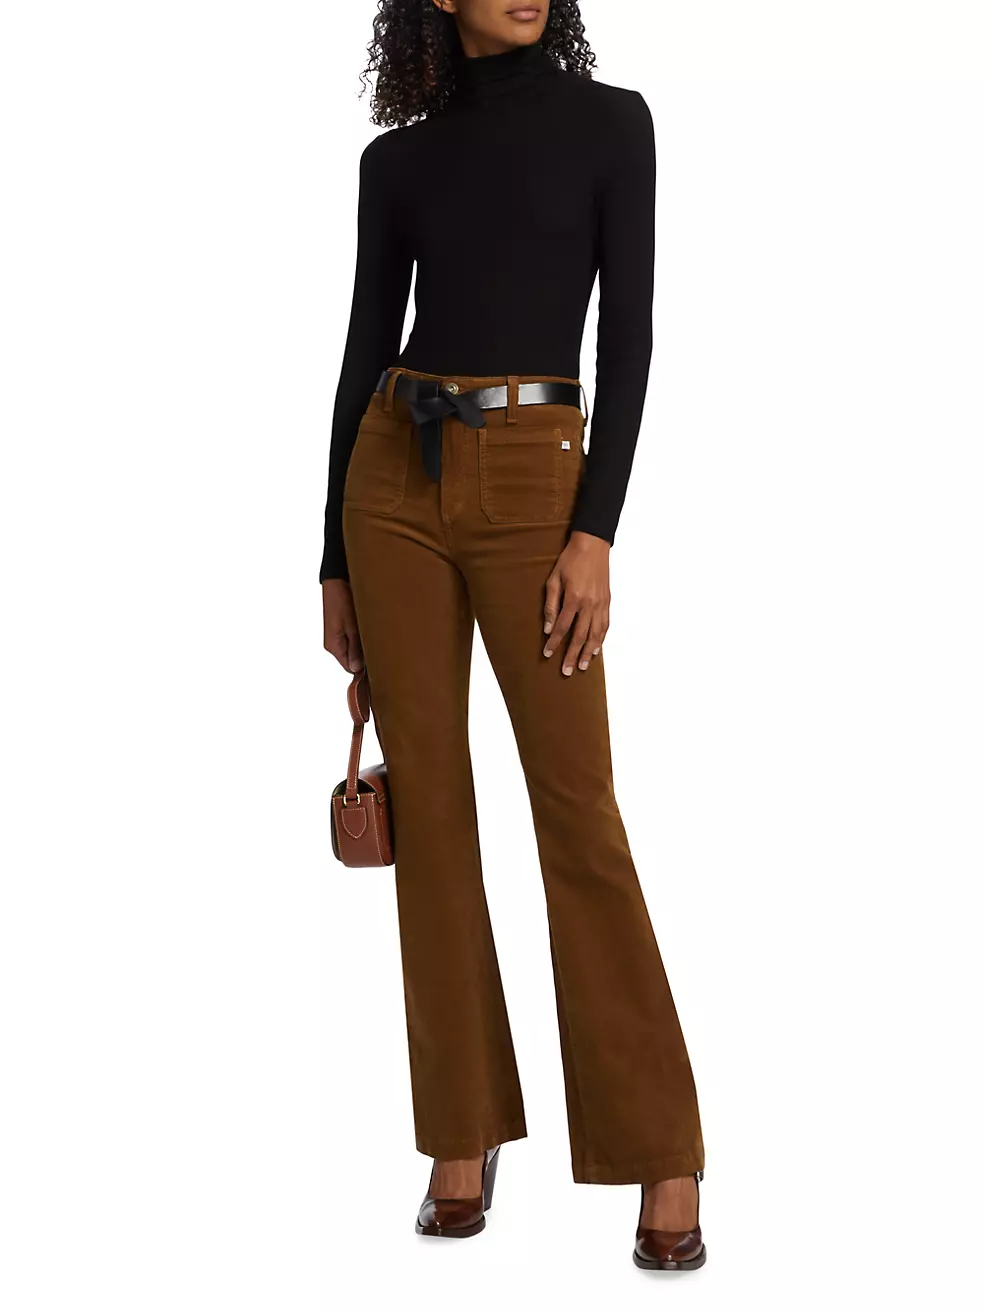 Shop AG Jeans Anisten Corduroy High-Rise Bootcut Jeans | Saks Fifth Avenue